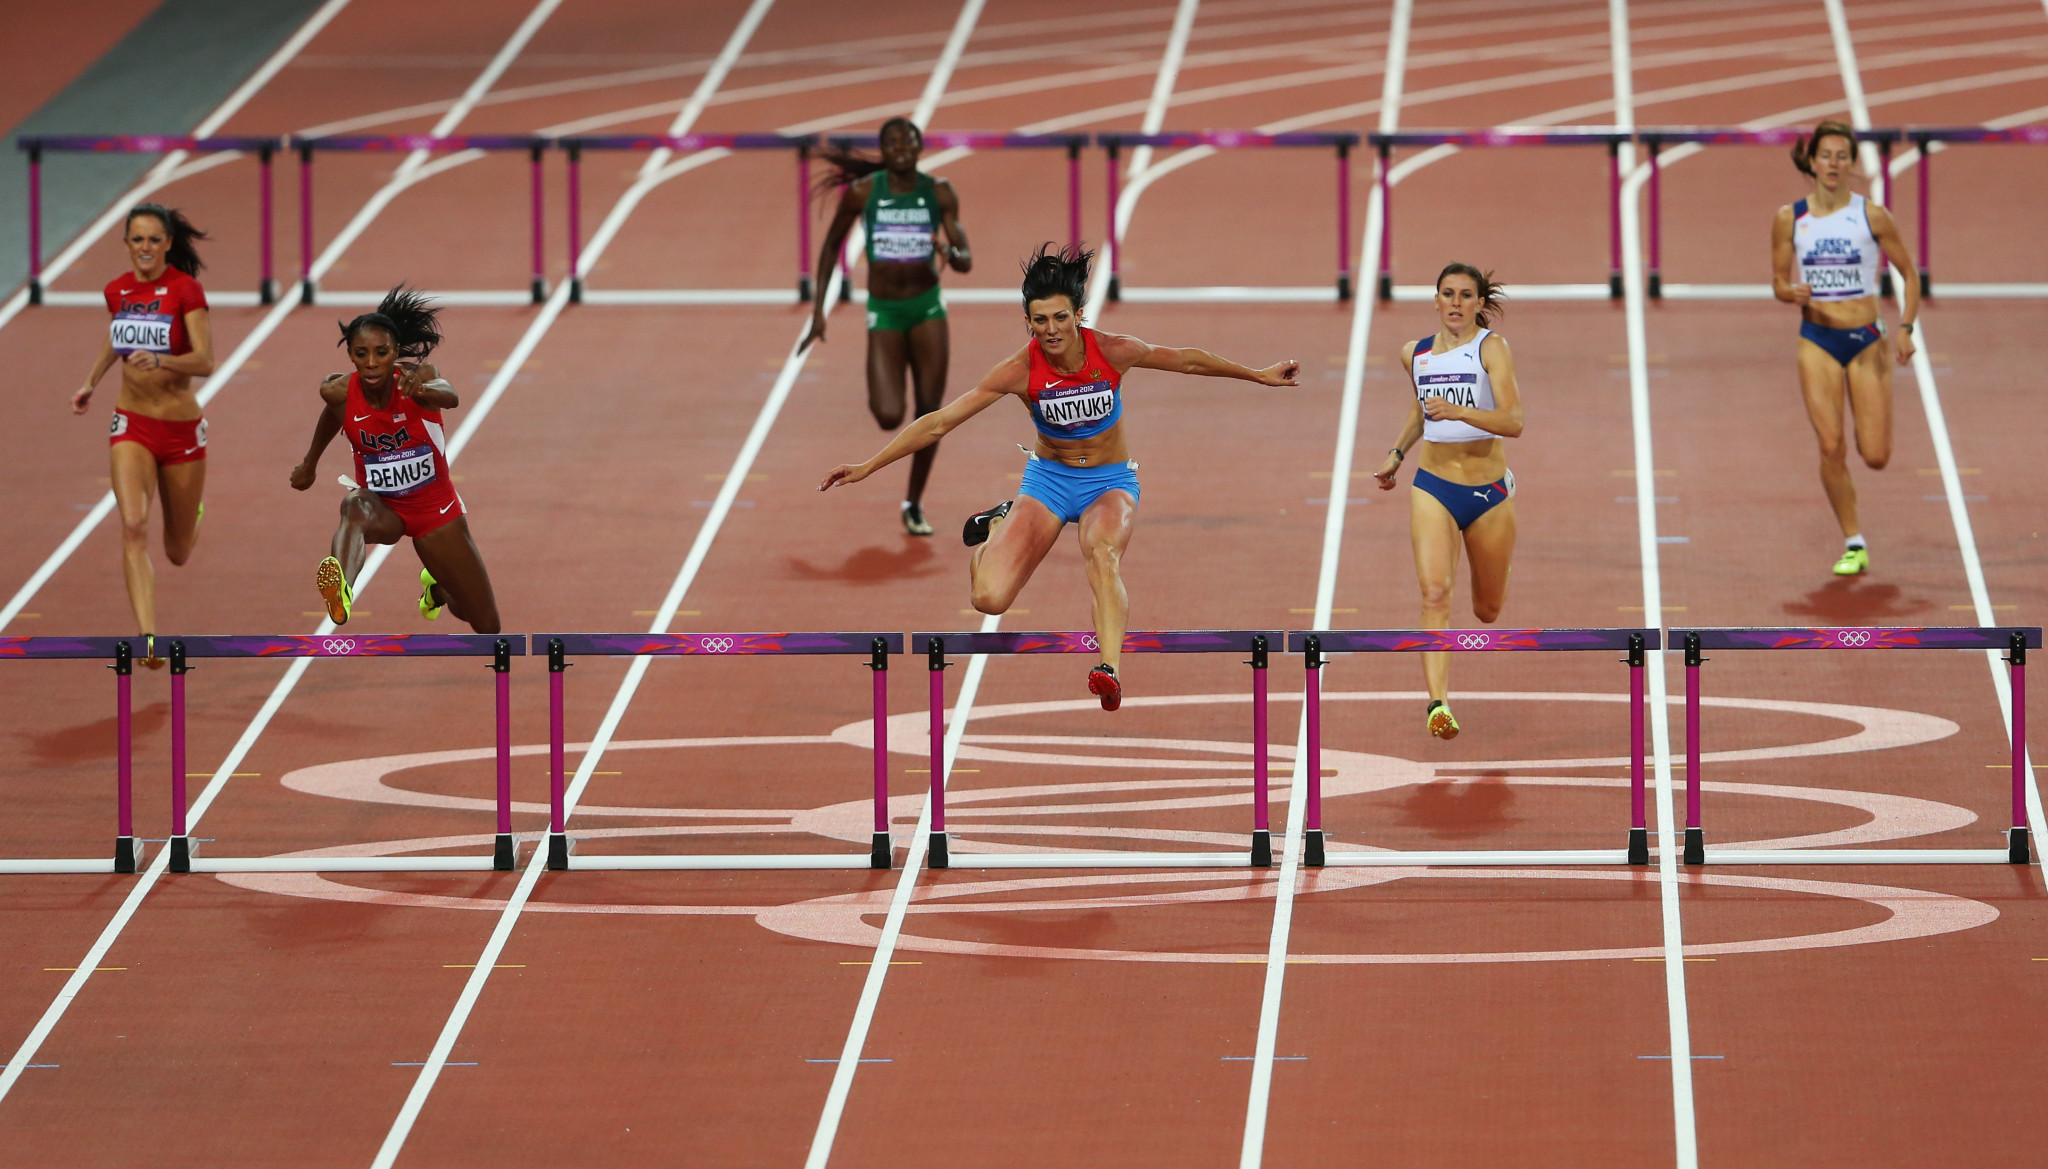 The United States' Lashinda Demus, left, narrowly missed out in the women's 400m hurdles final to Natalya Antyukh, at London 2012 but will now be officially upgraded to the gold medal ©Getty Images